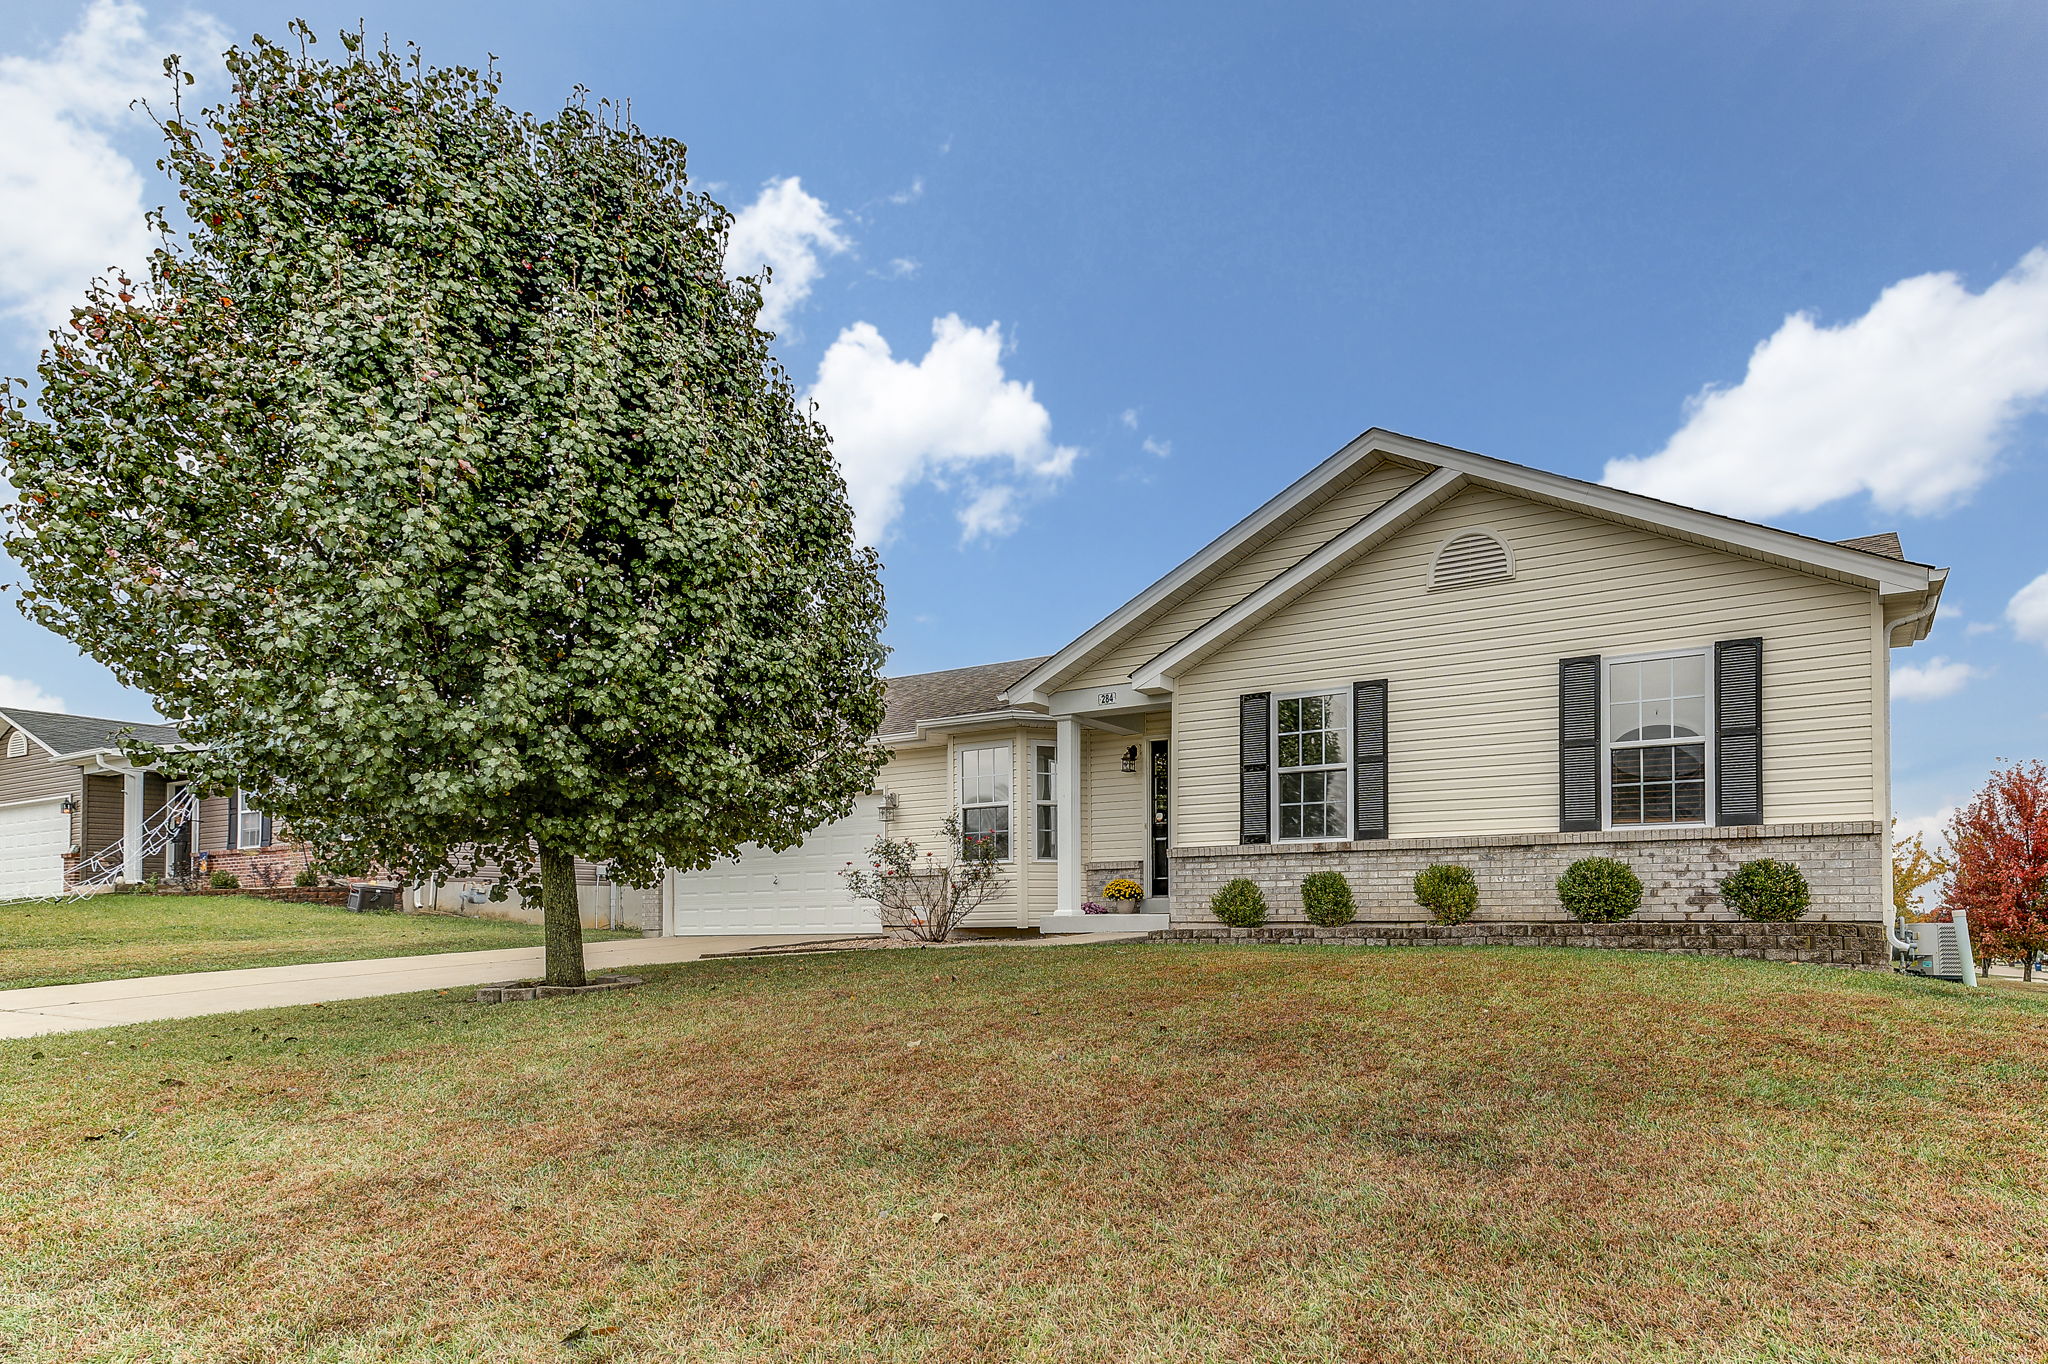  284 Whitetail Crossing Dr, Troy, MO 63379, US